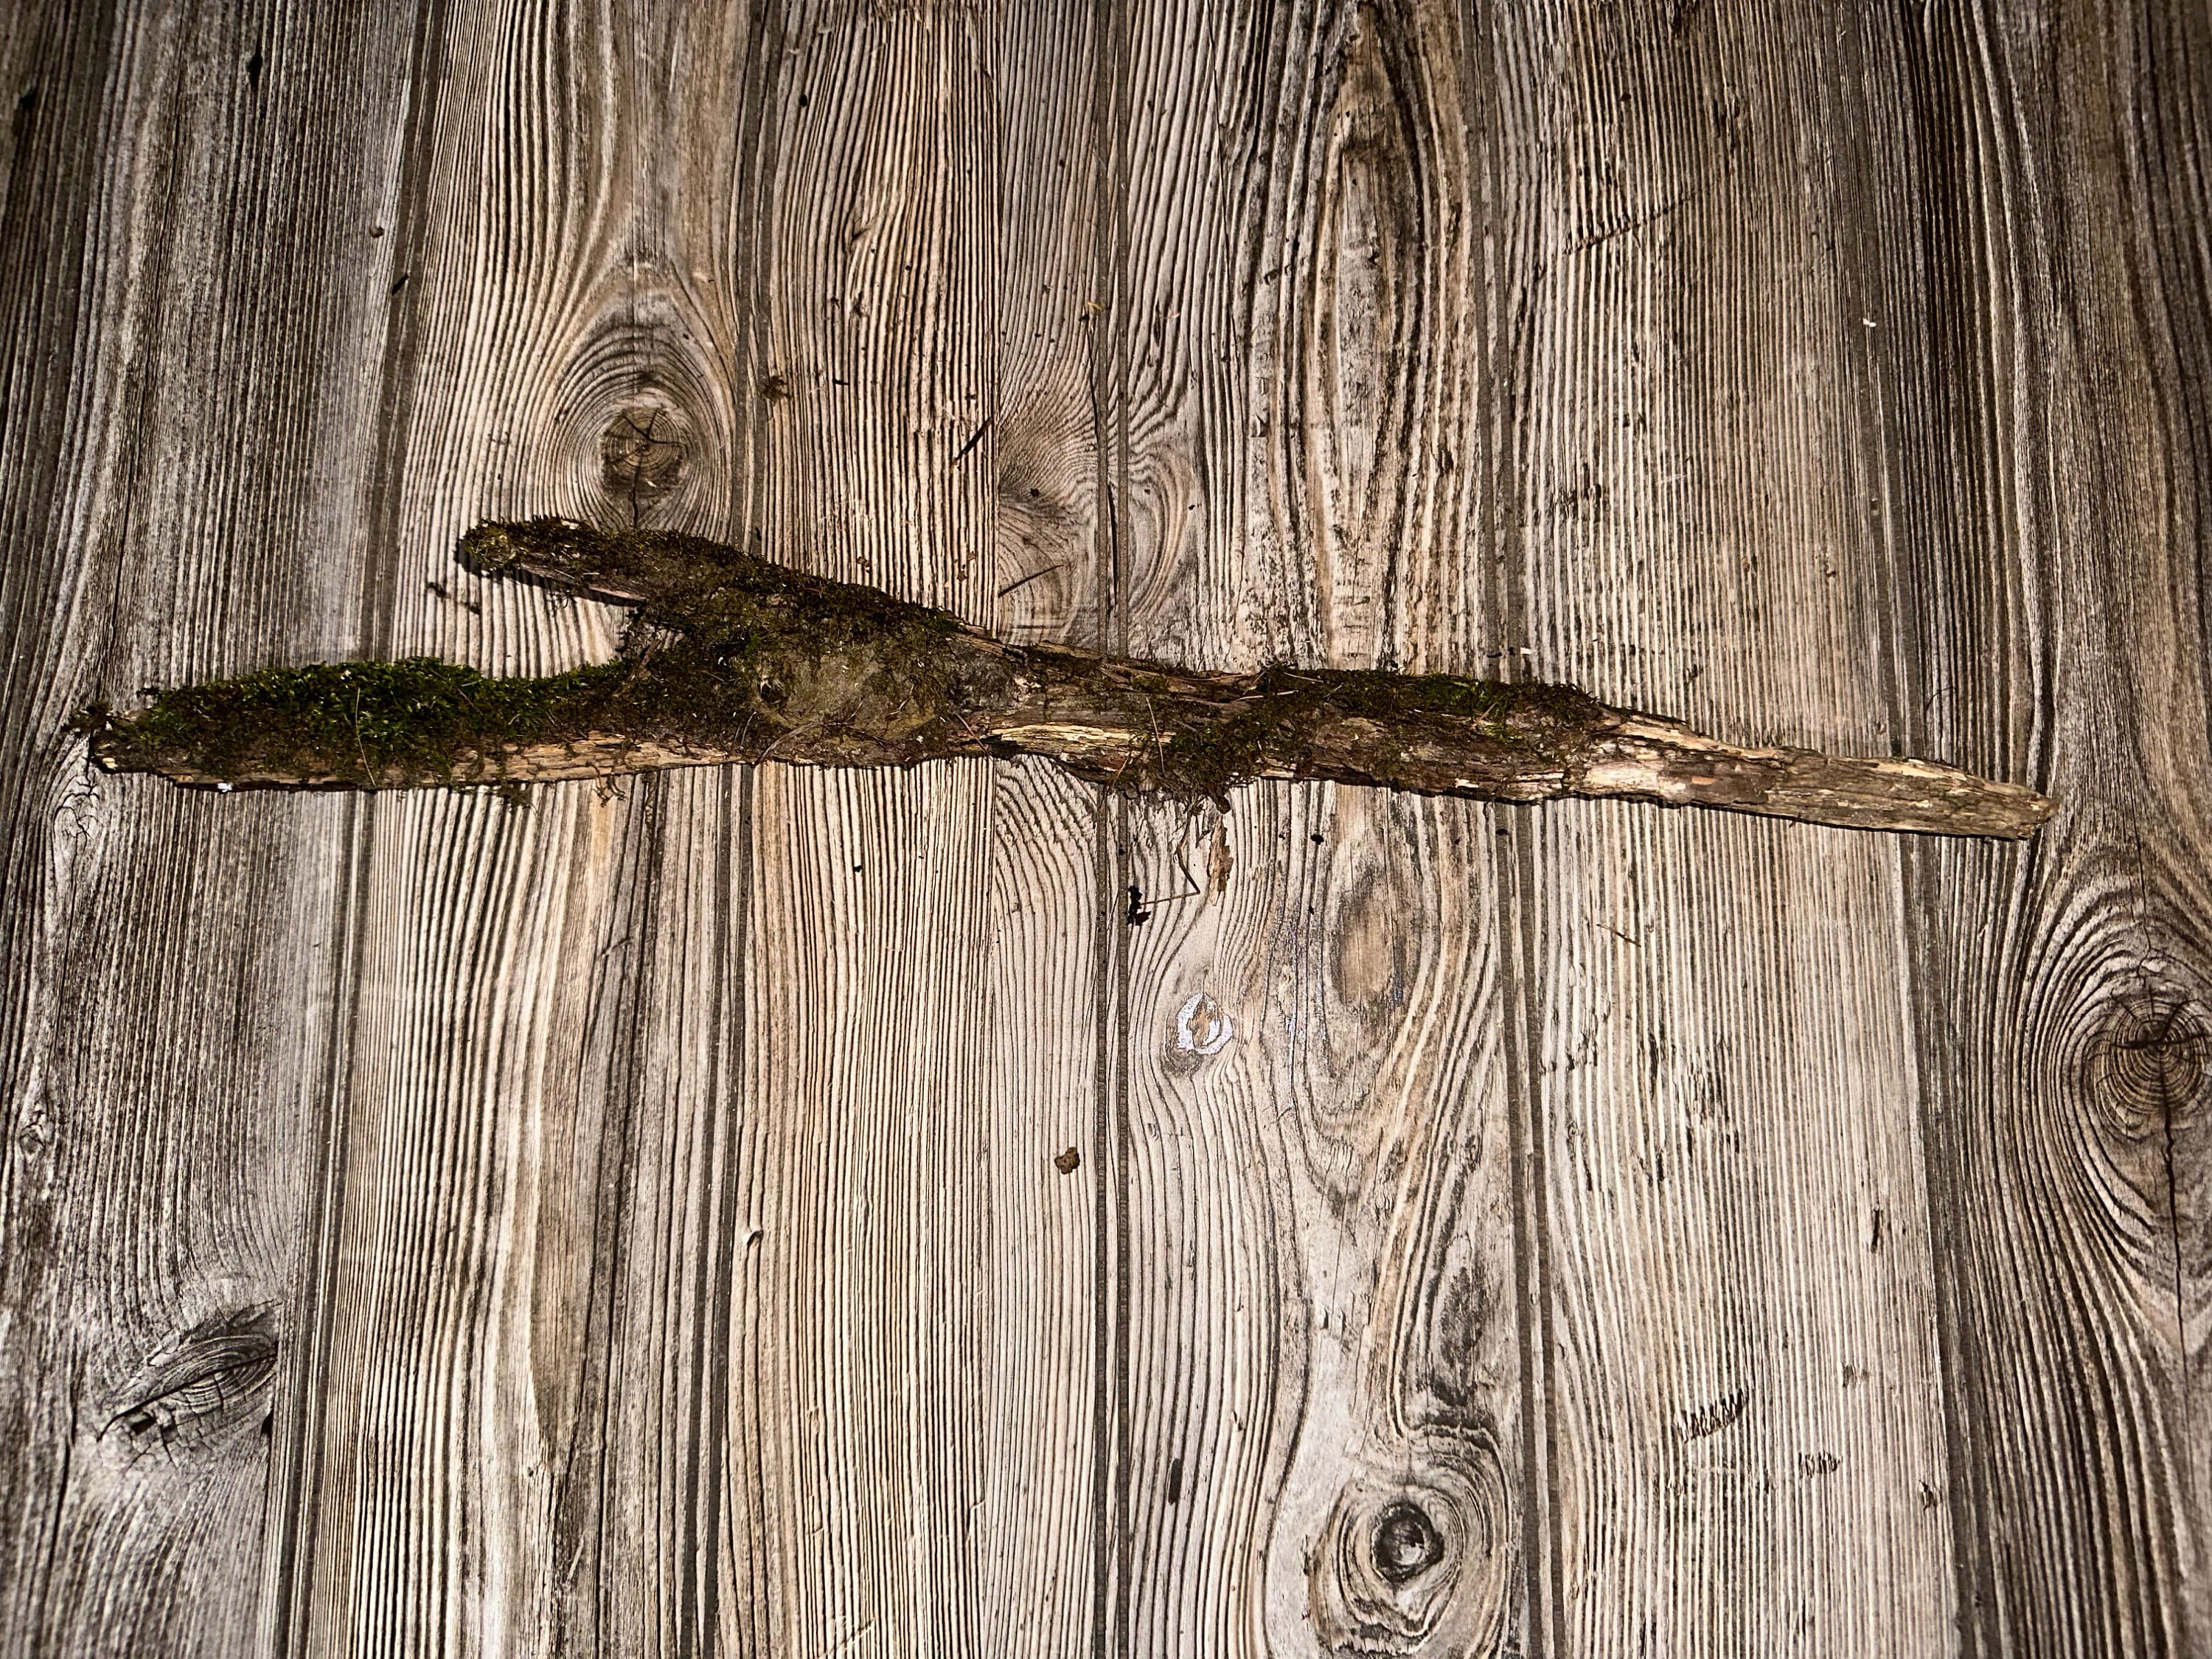 Moss Covered Log, Mossy Log, 19 Inches Long by 3 Inches Wide and 1 Inch High